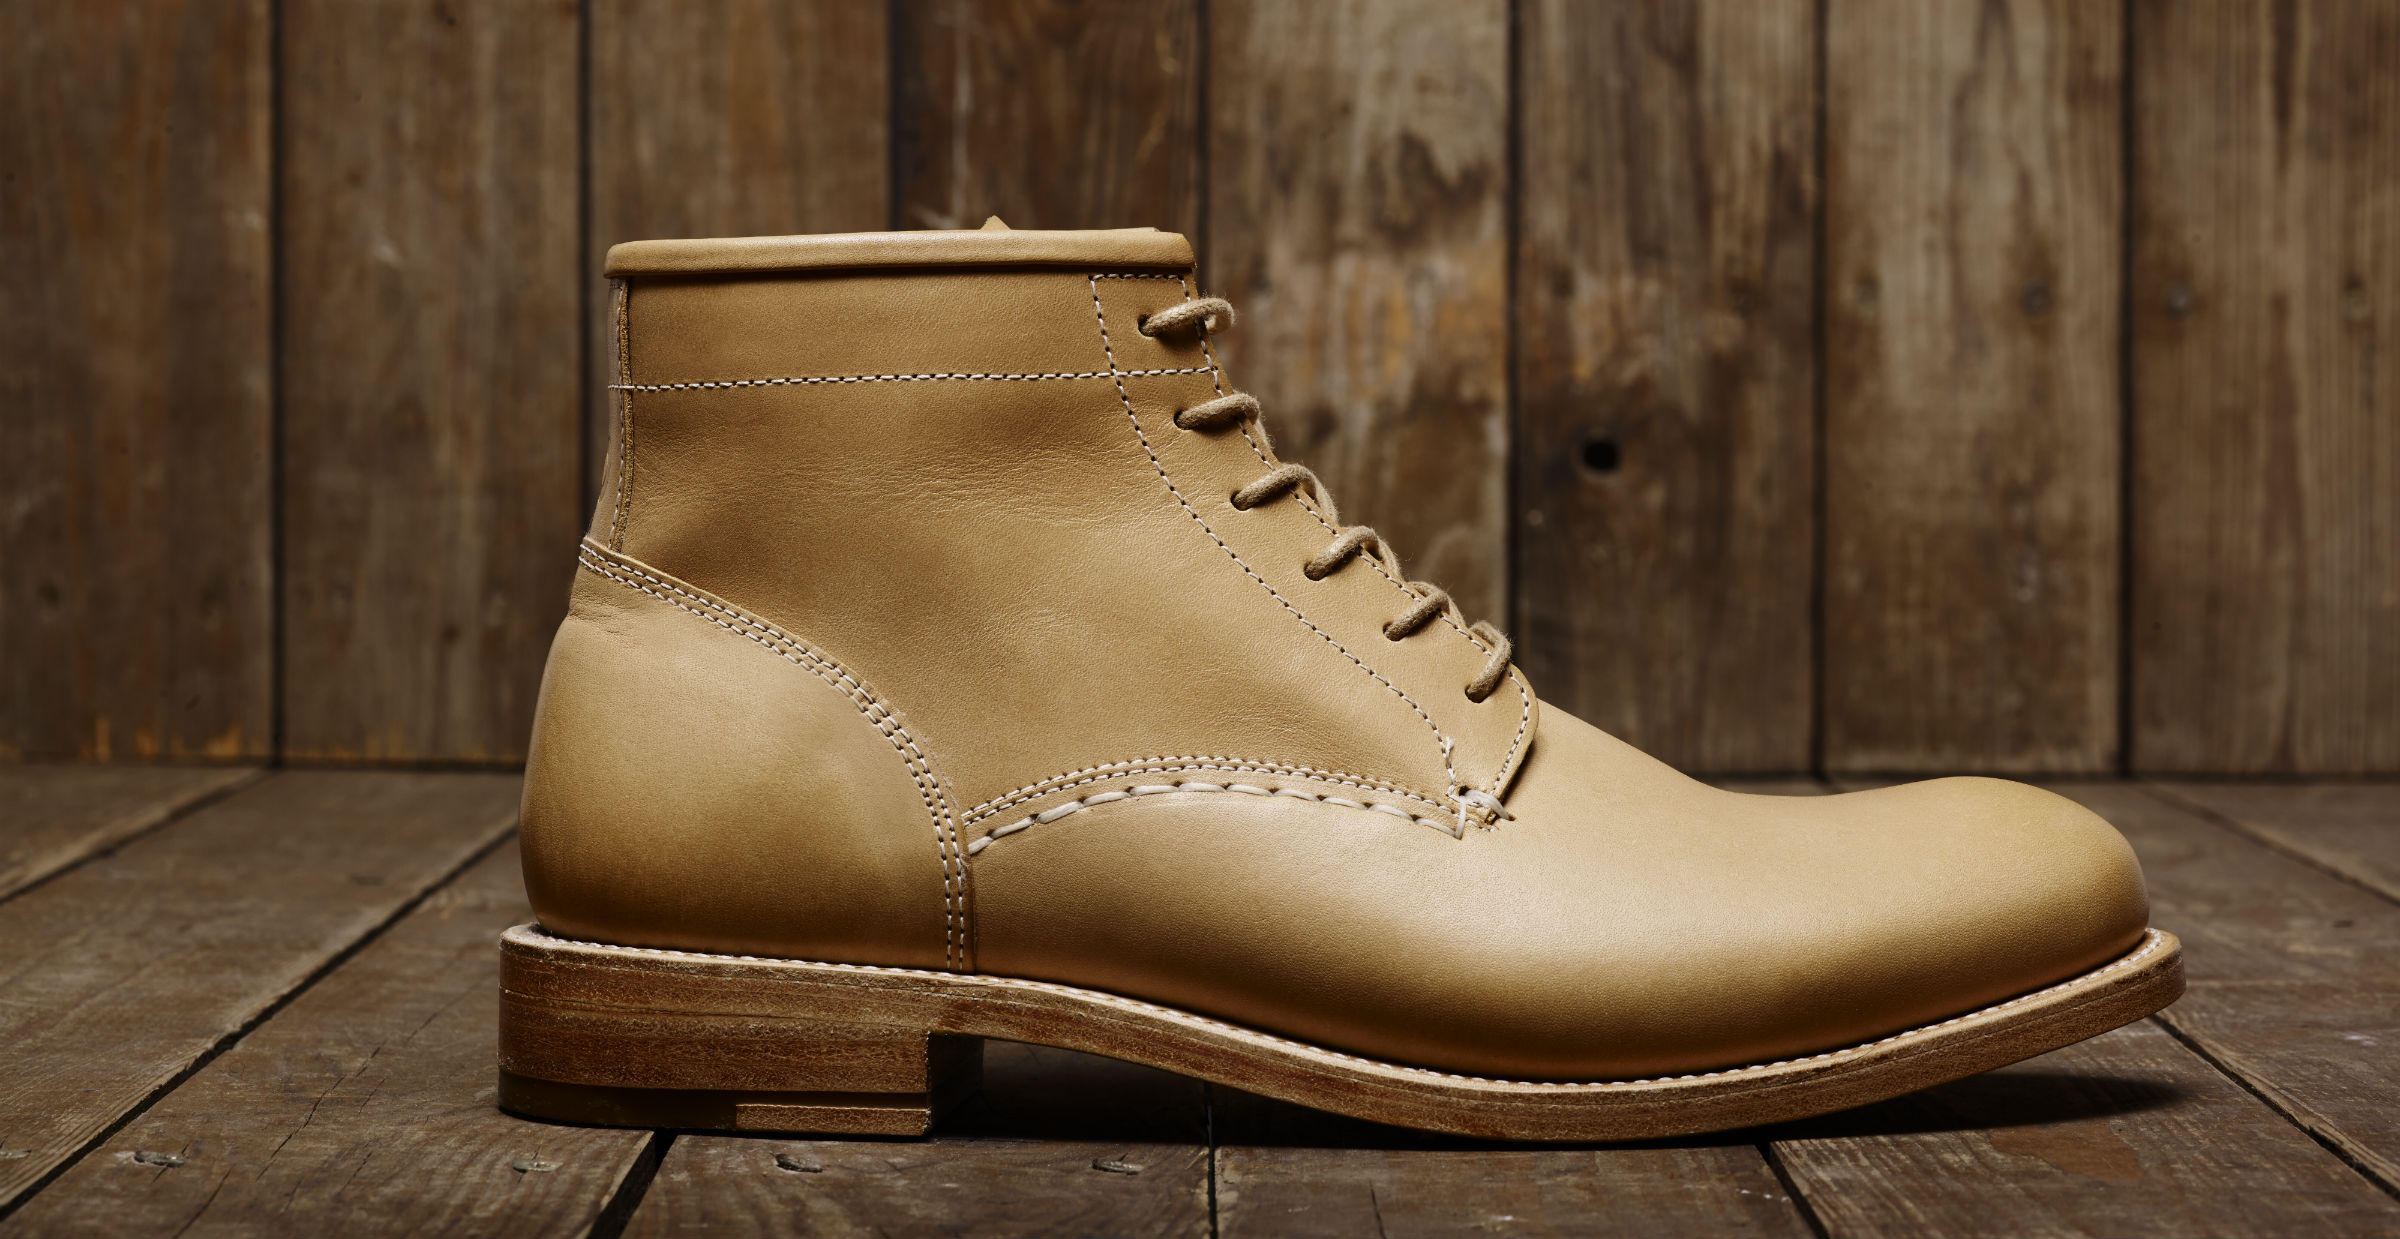 Vegetable tanned leather Boots by Butts and Shoulders